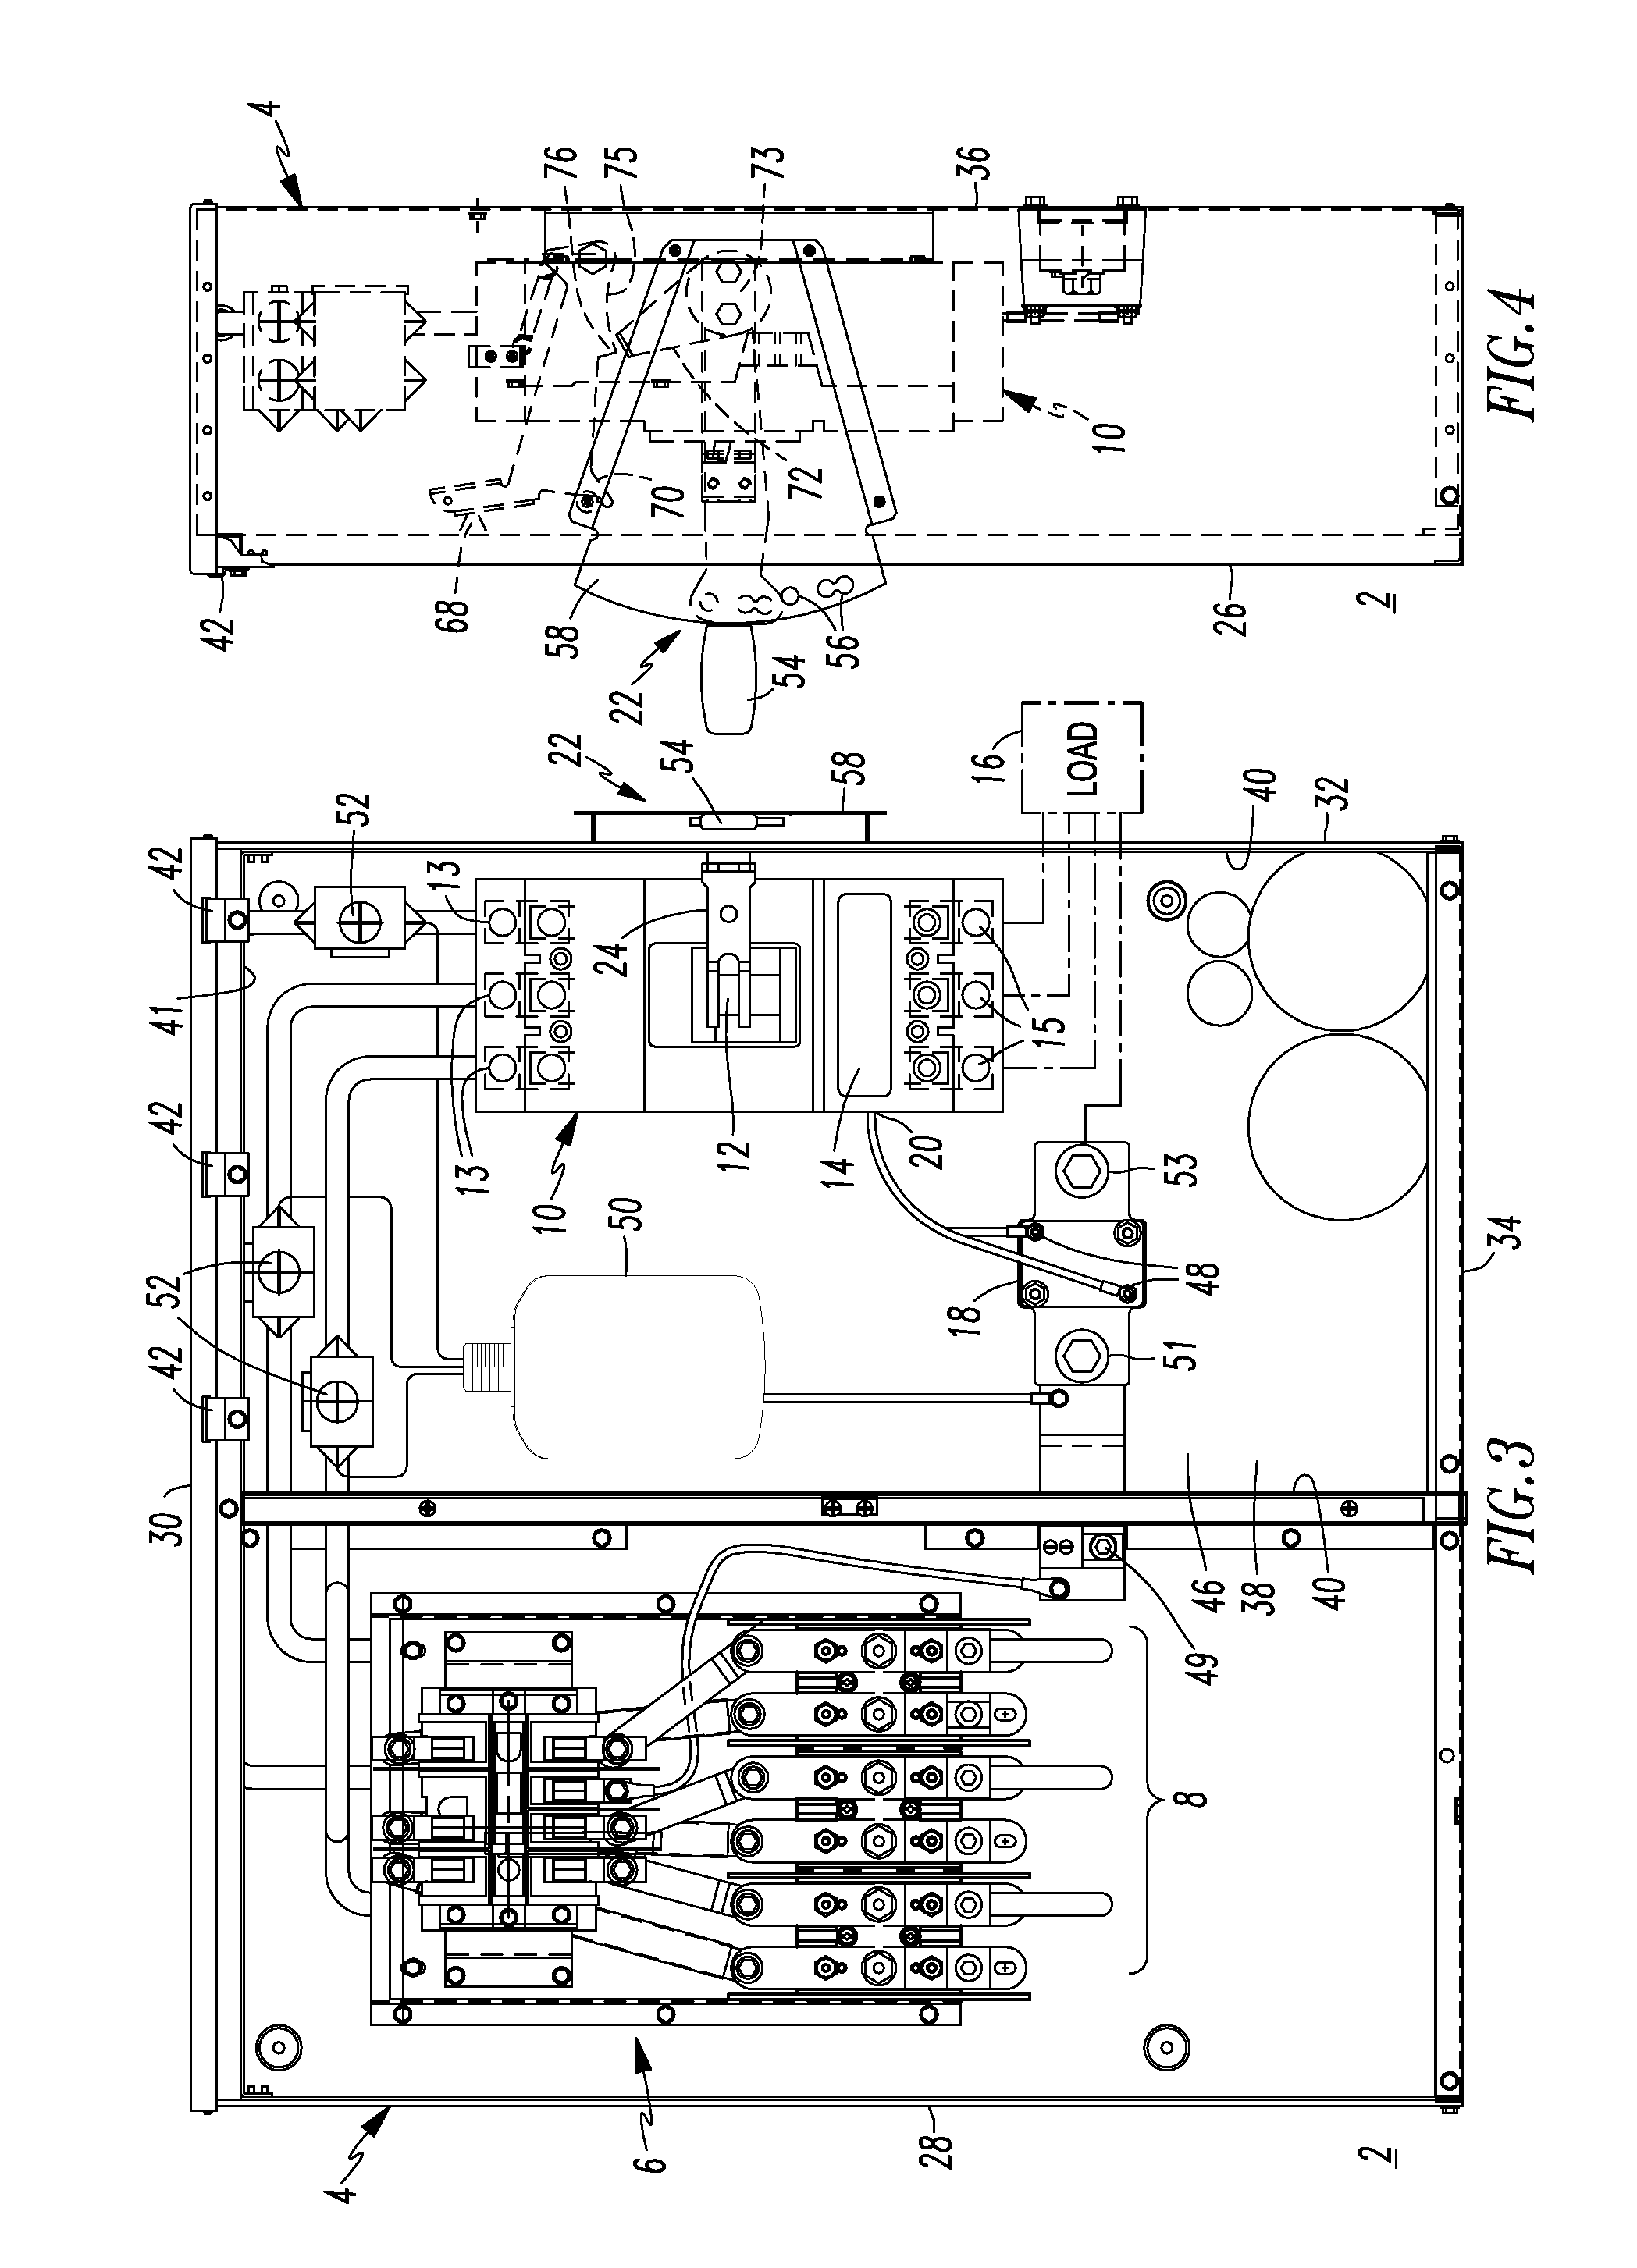 Enclosed metering and protective electrical apparatus including an external disconnect handle